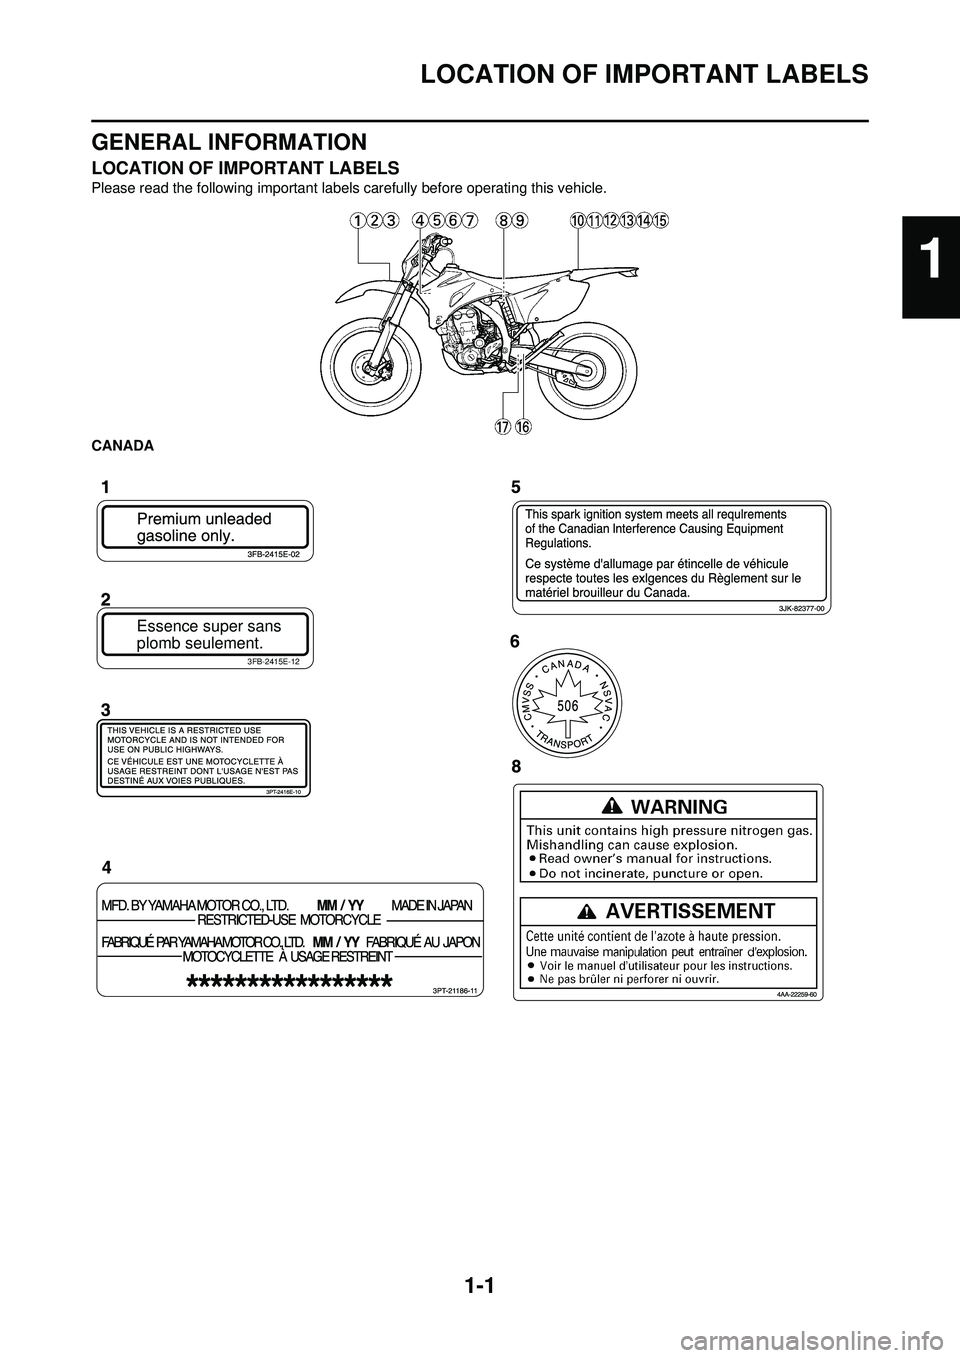 YAMAHA WR 250F 2010 User Guide 1-1
LOCATION OF IMPORTANT LABELS
GENERAL INFORMATION
LOCATION OF IMPORTANT LABELS
Please read the following important labels carefully before operating this vehicle.
CANADA
Essence super sans
plomb se